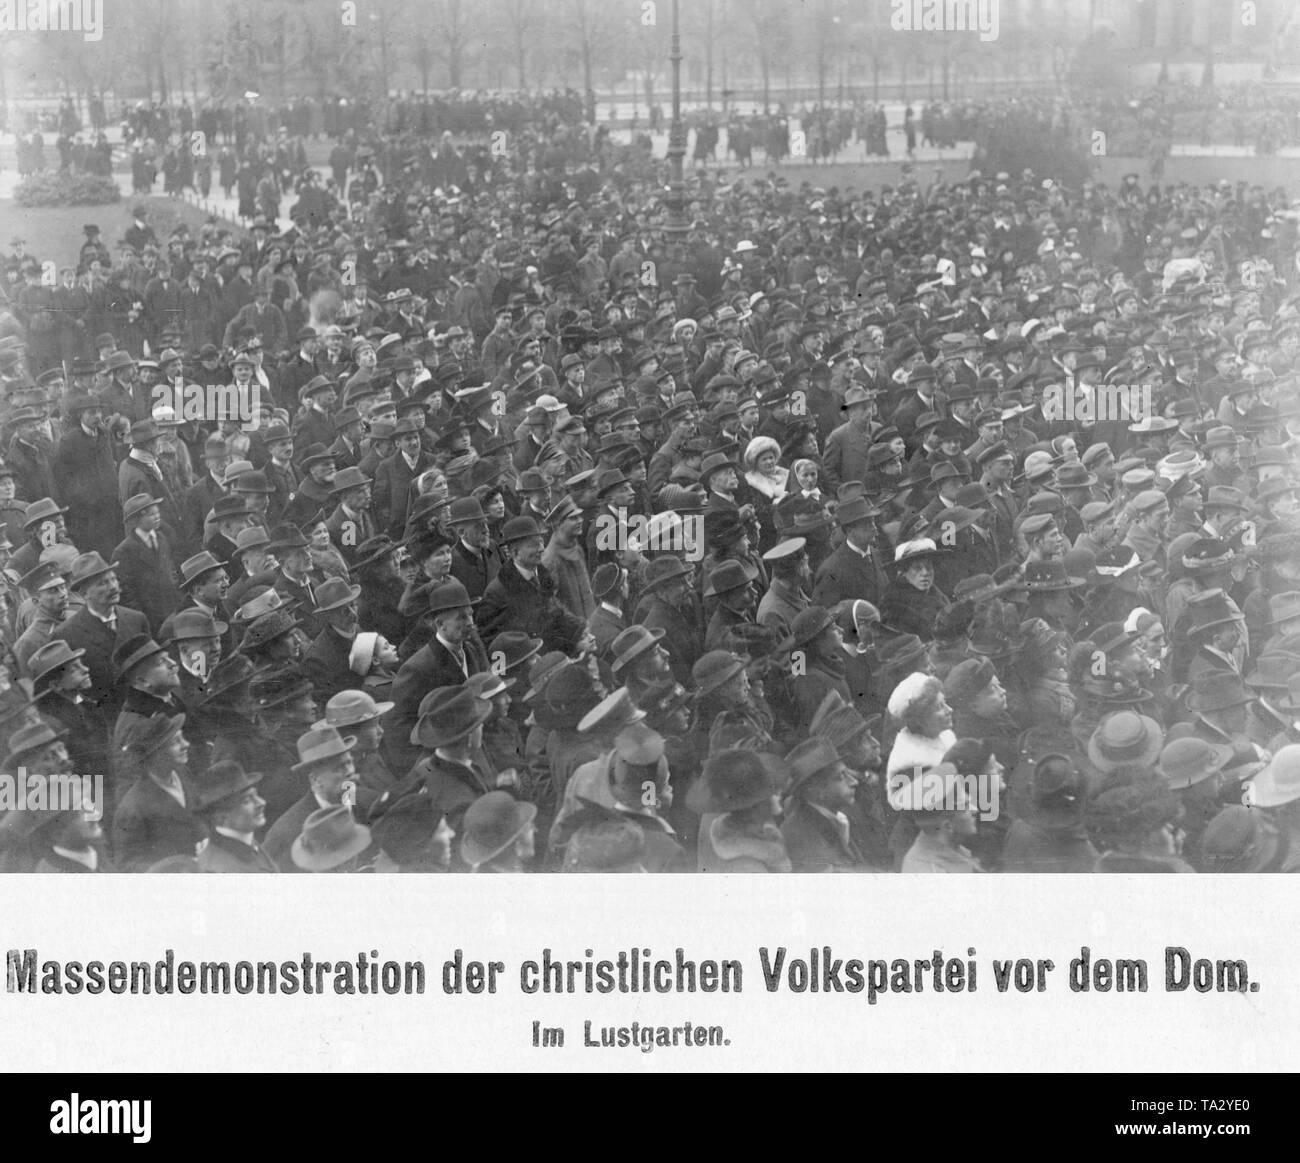 Supporters of the Centre Party, which at that time still bore the alternative name of Christliche Volkspartei (Christian People's Party) gather in the Lustgarten in Berlin. Stock Photo